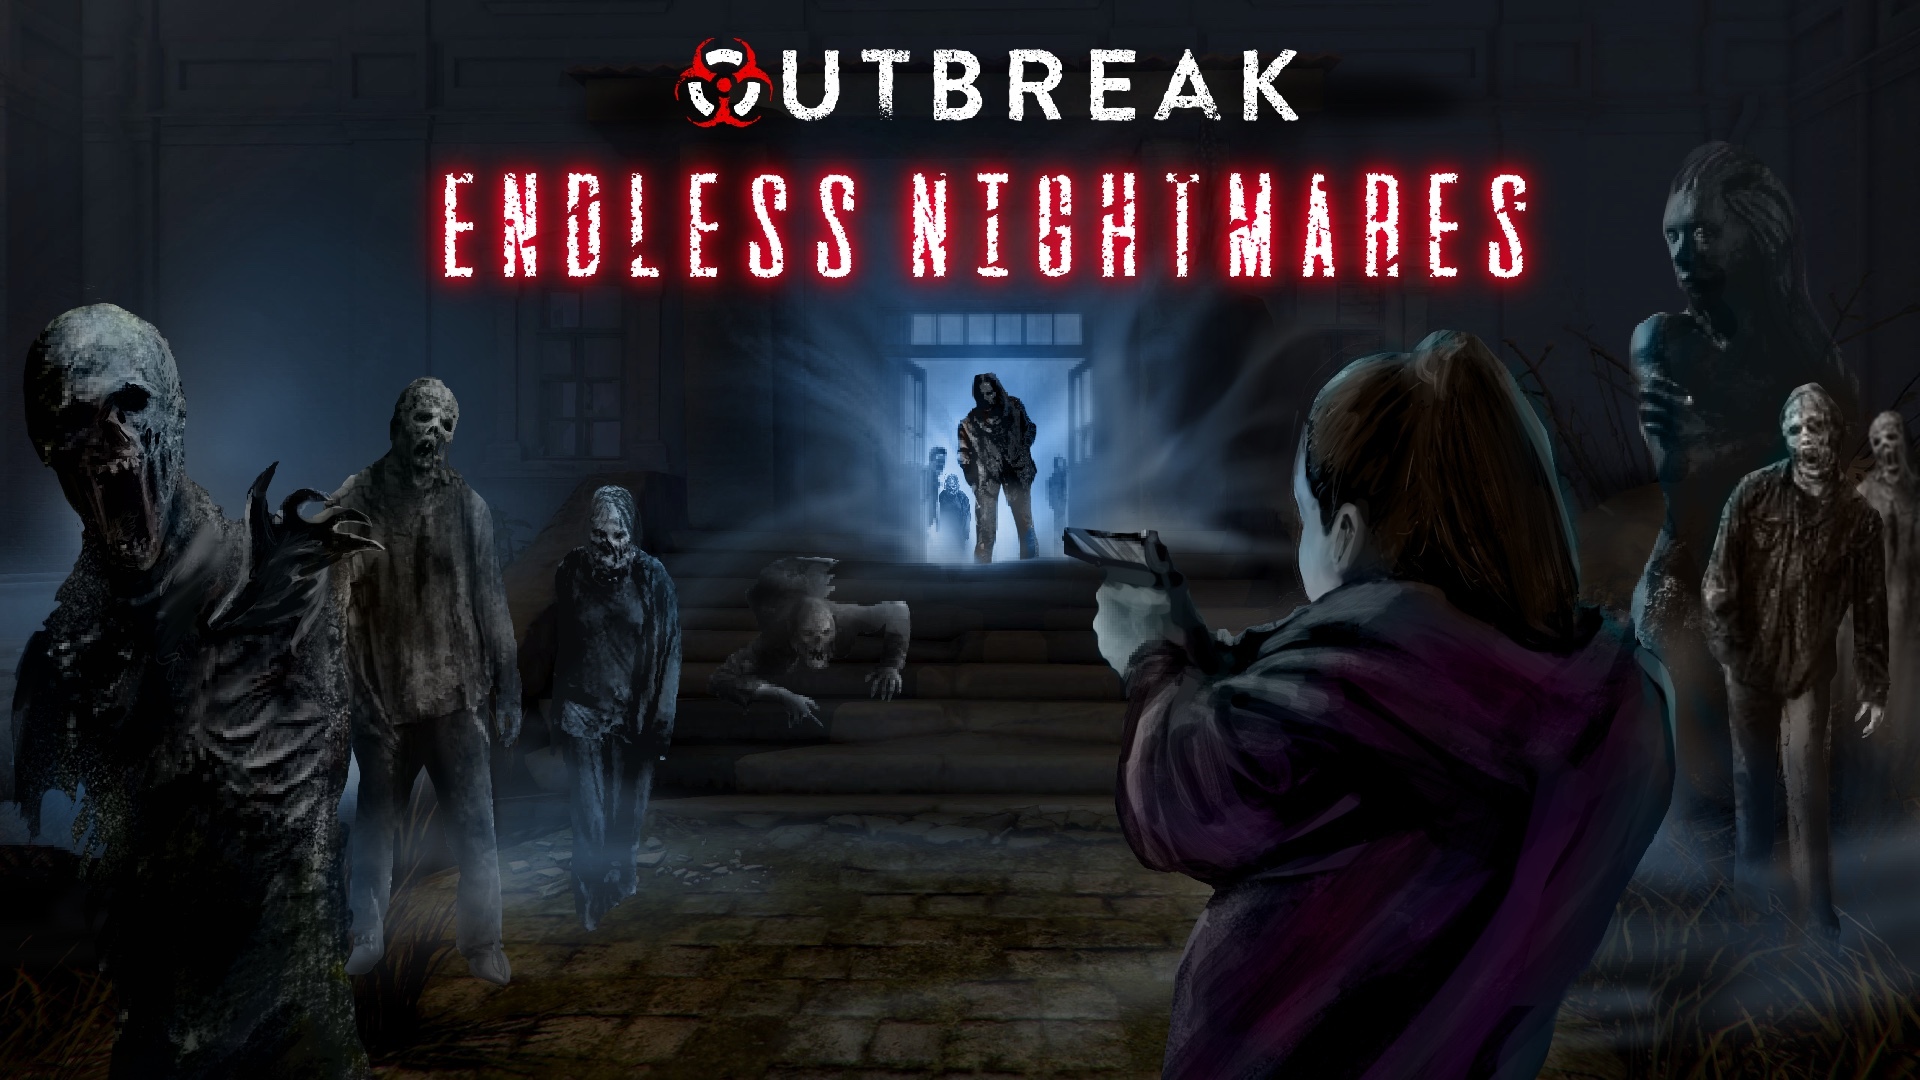 Outbreak: Endless Nightmares Is Out Now On Playstation 5, Xbox Series X|S, Nintendo Switch & Steam